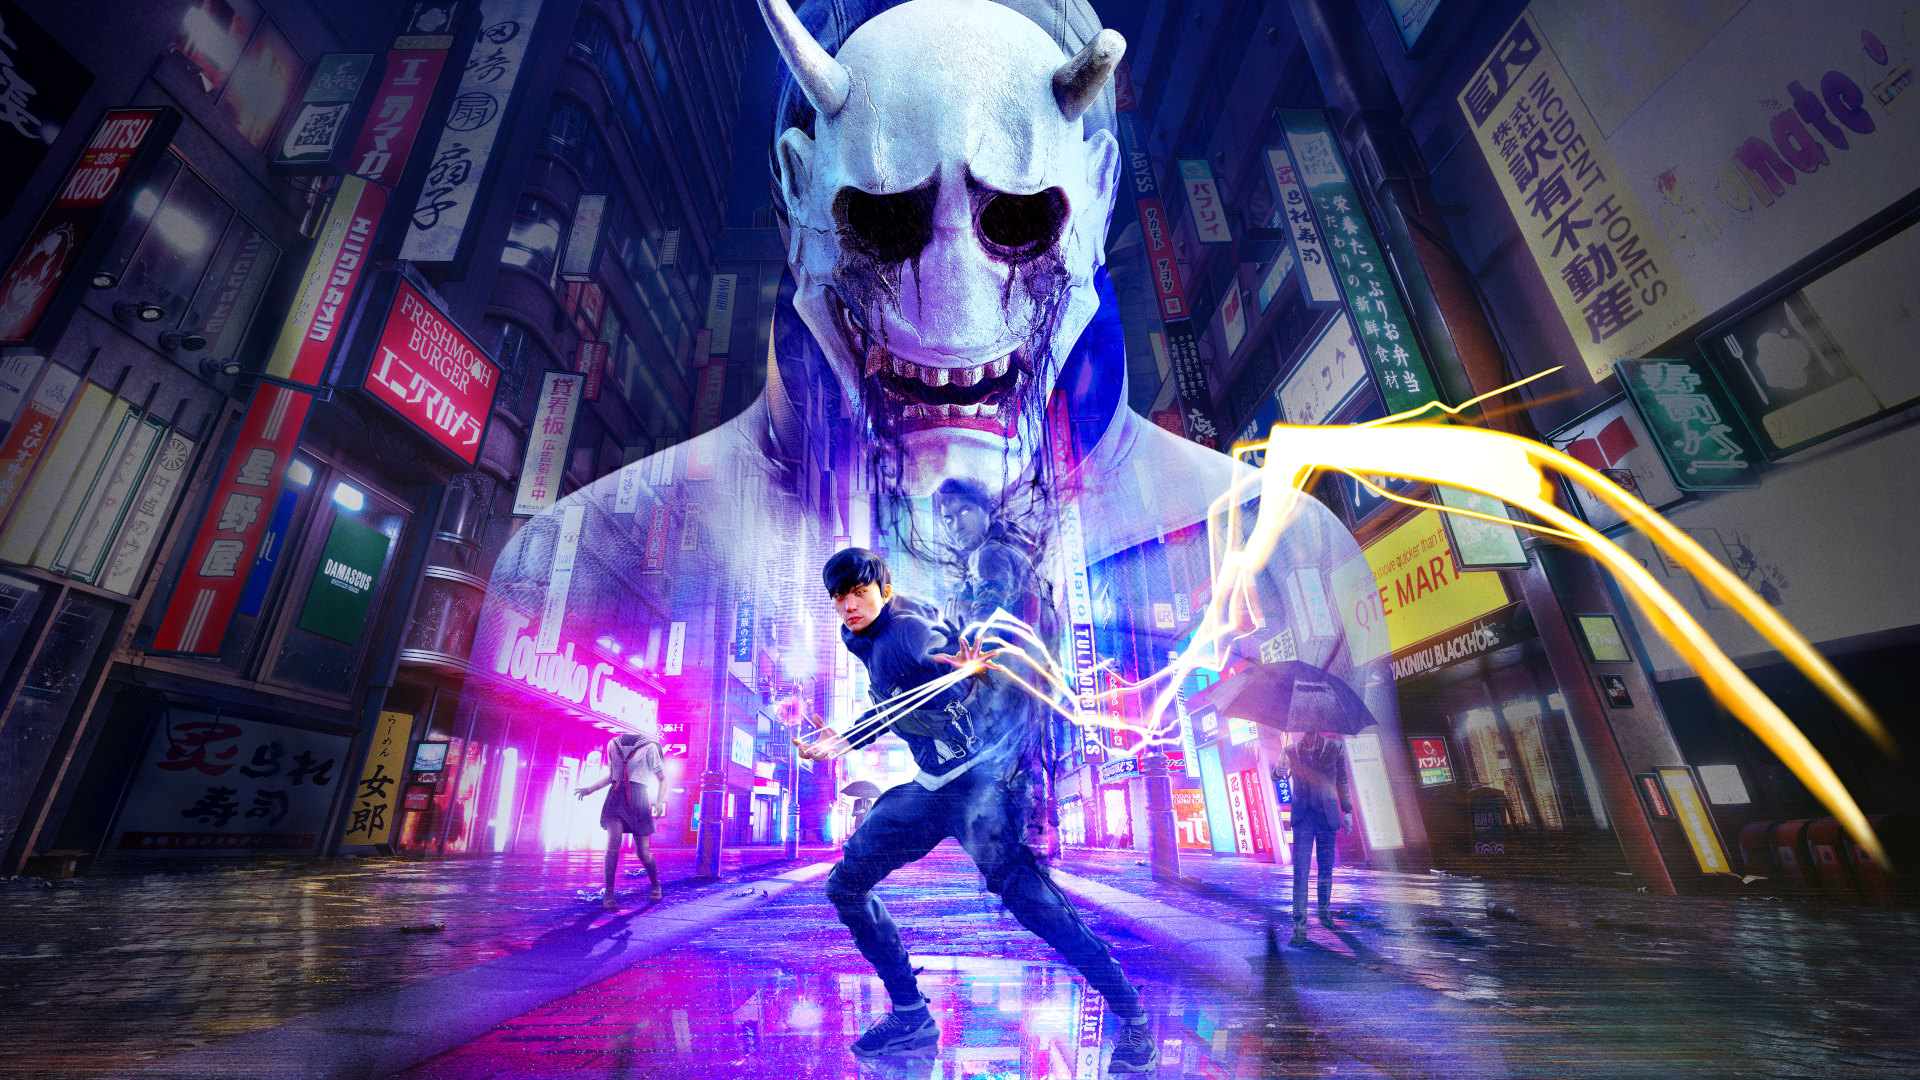 A promotional image showing the protagonist of Ghostwire Tokyo while a villain wearing a white hannya mask looms behind him